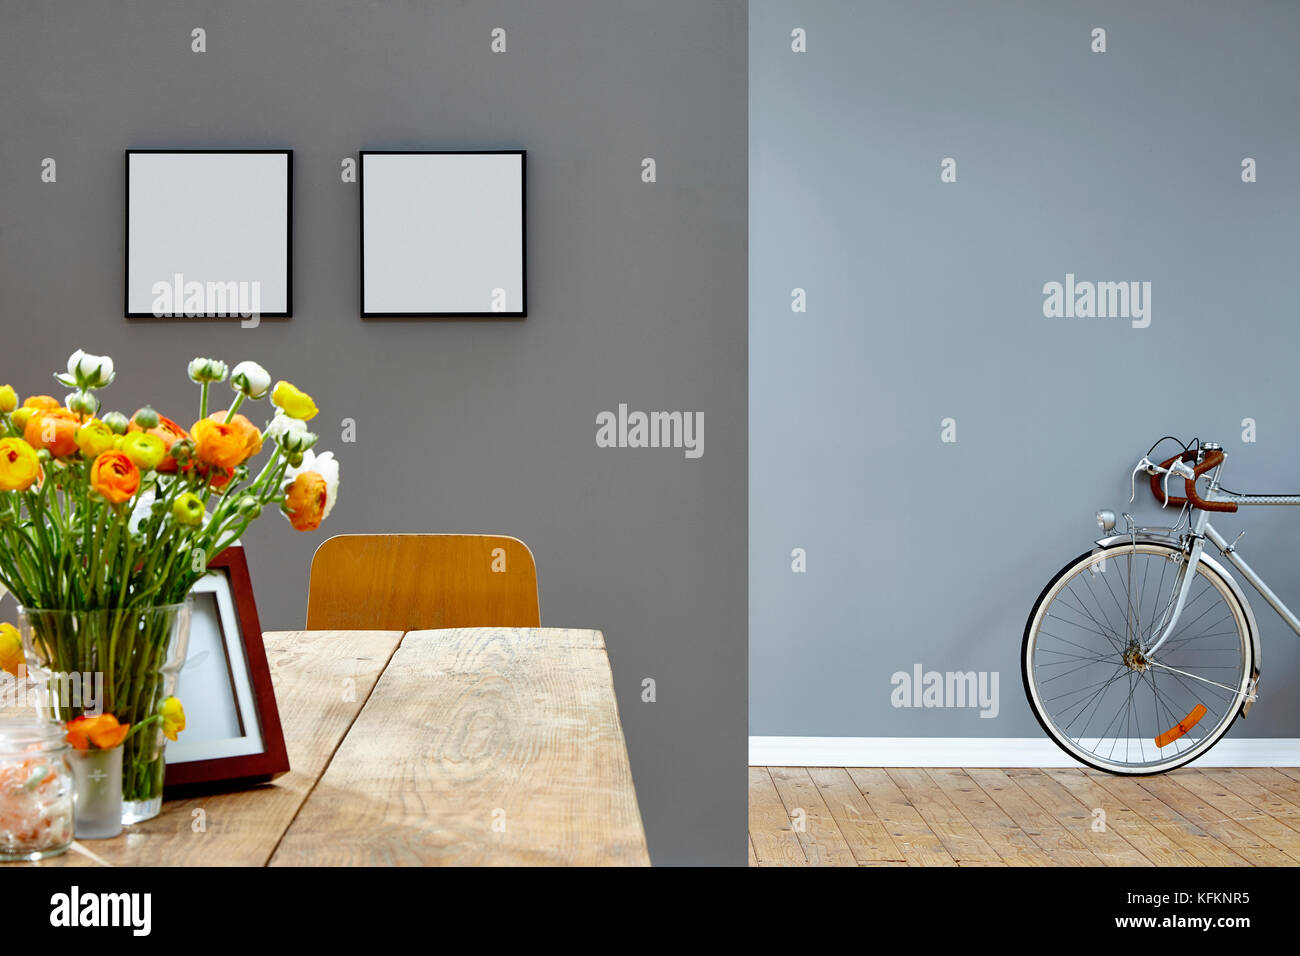 two rooms vivid dining room and vintage bike in corridor Stock Photo